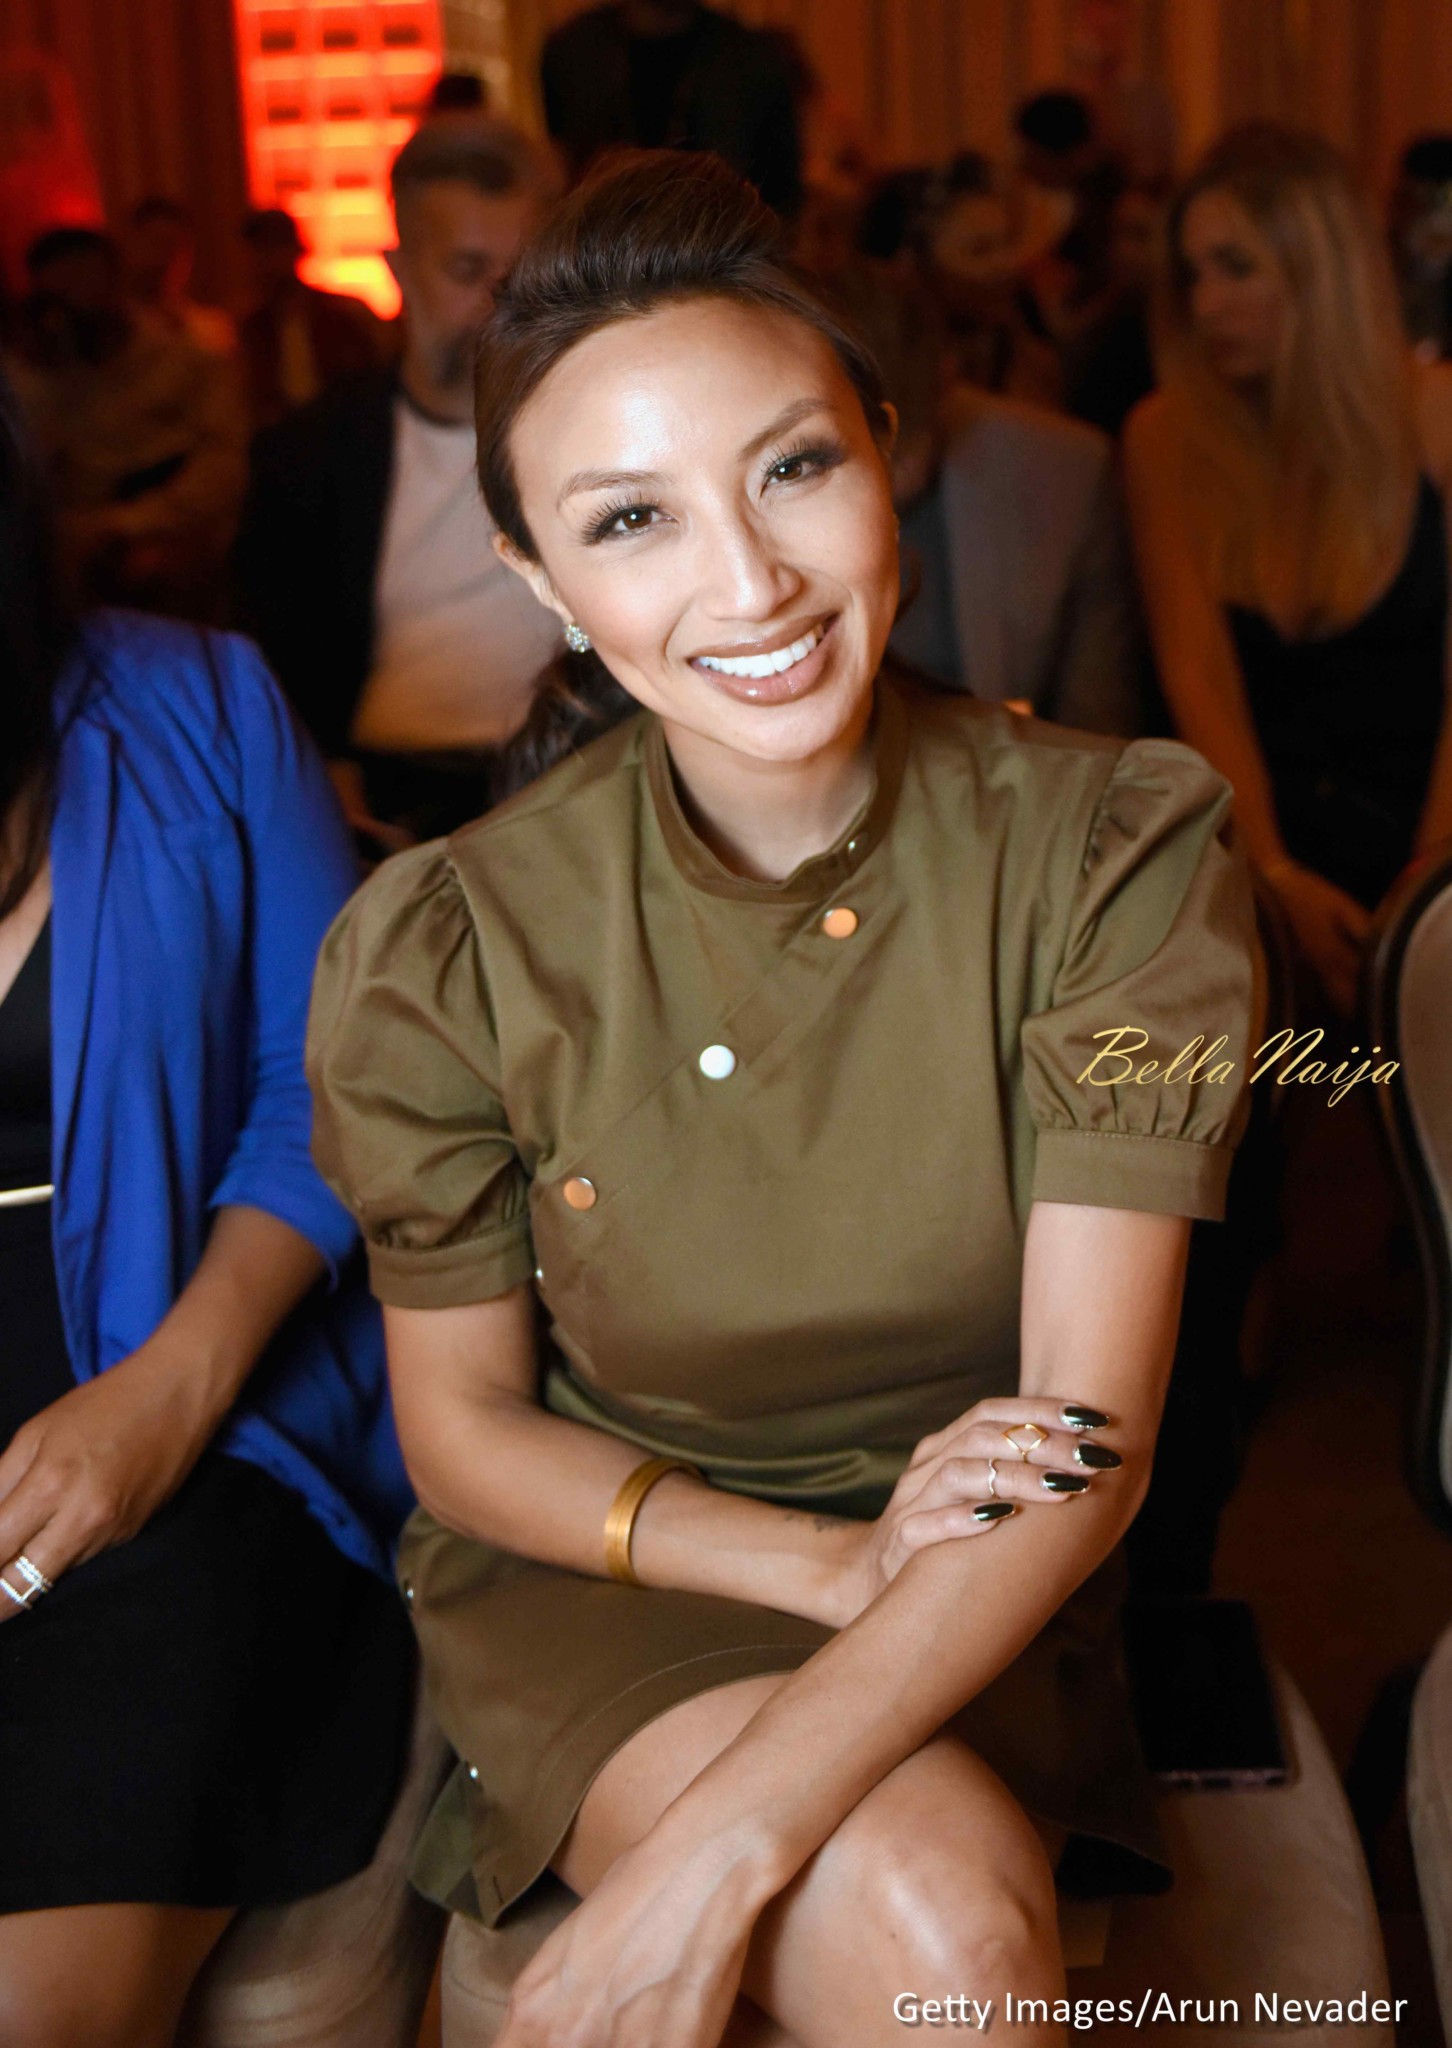 "There were no lies, no betrayals, no cheating" - Jeannie Mai opens up on Divorce | WATCH